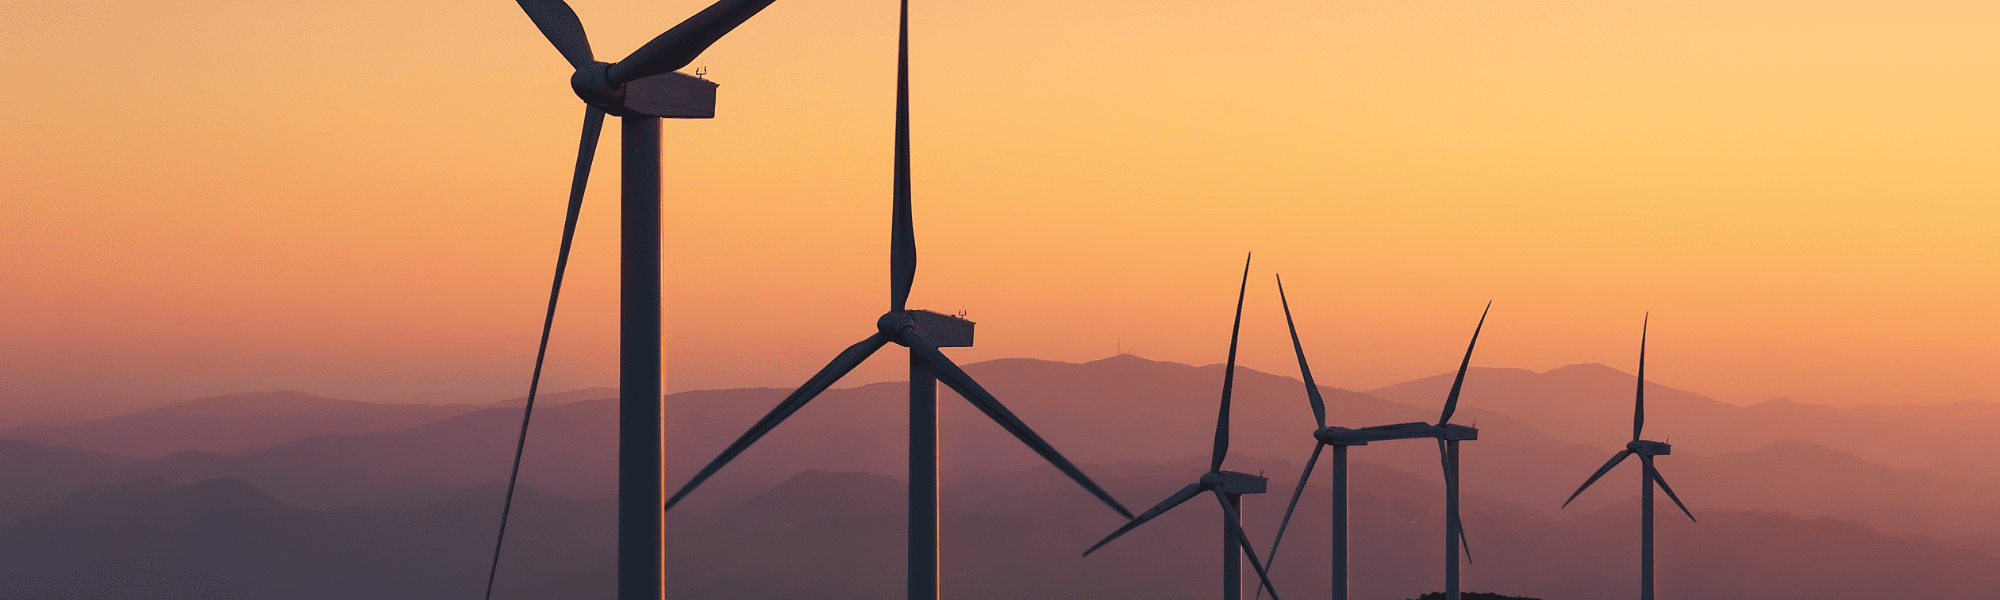 Image of wind turbines on a hill during sunset